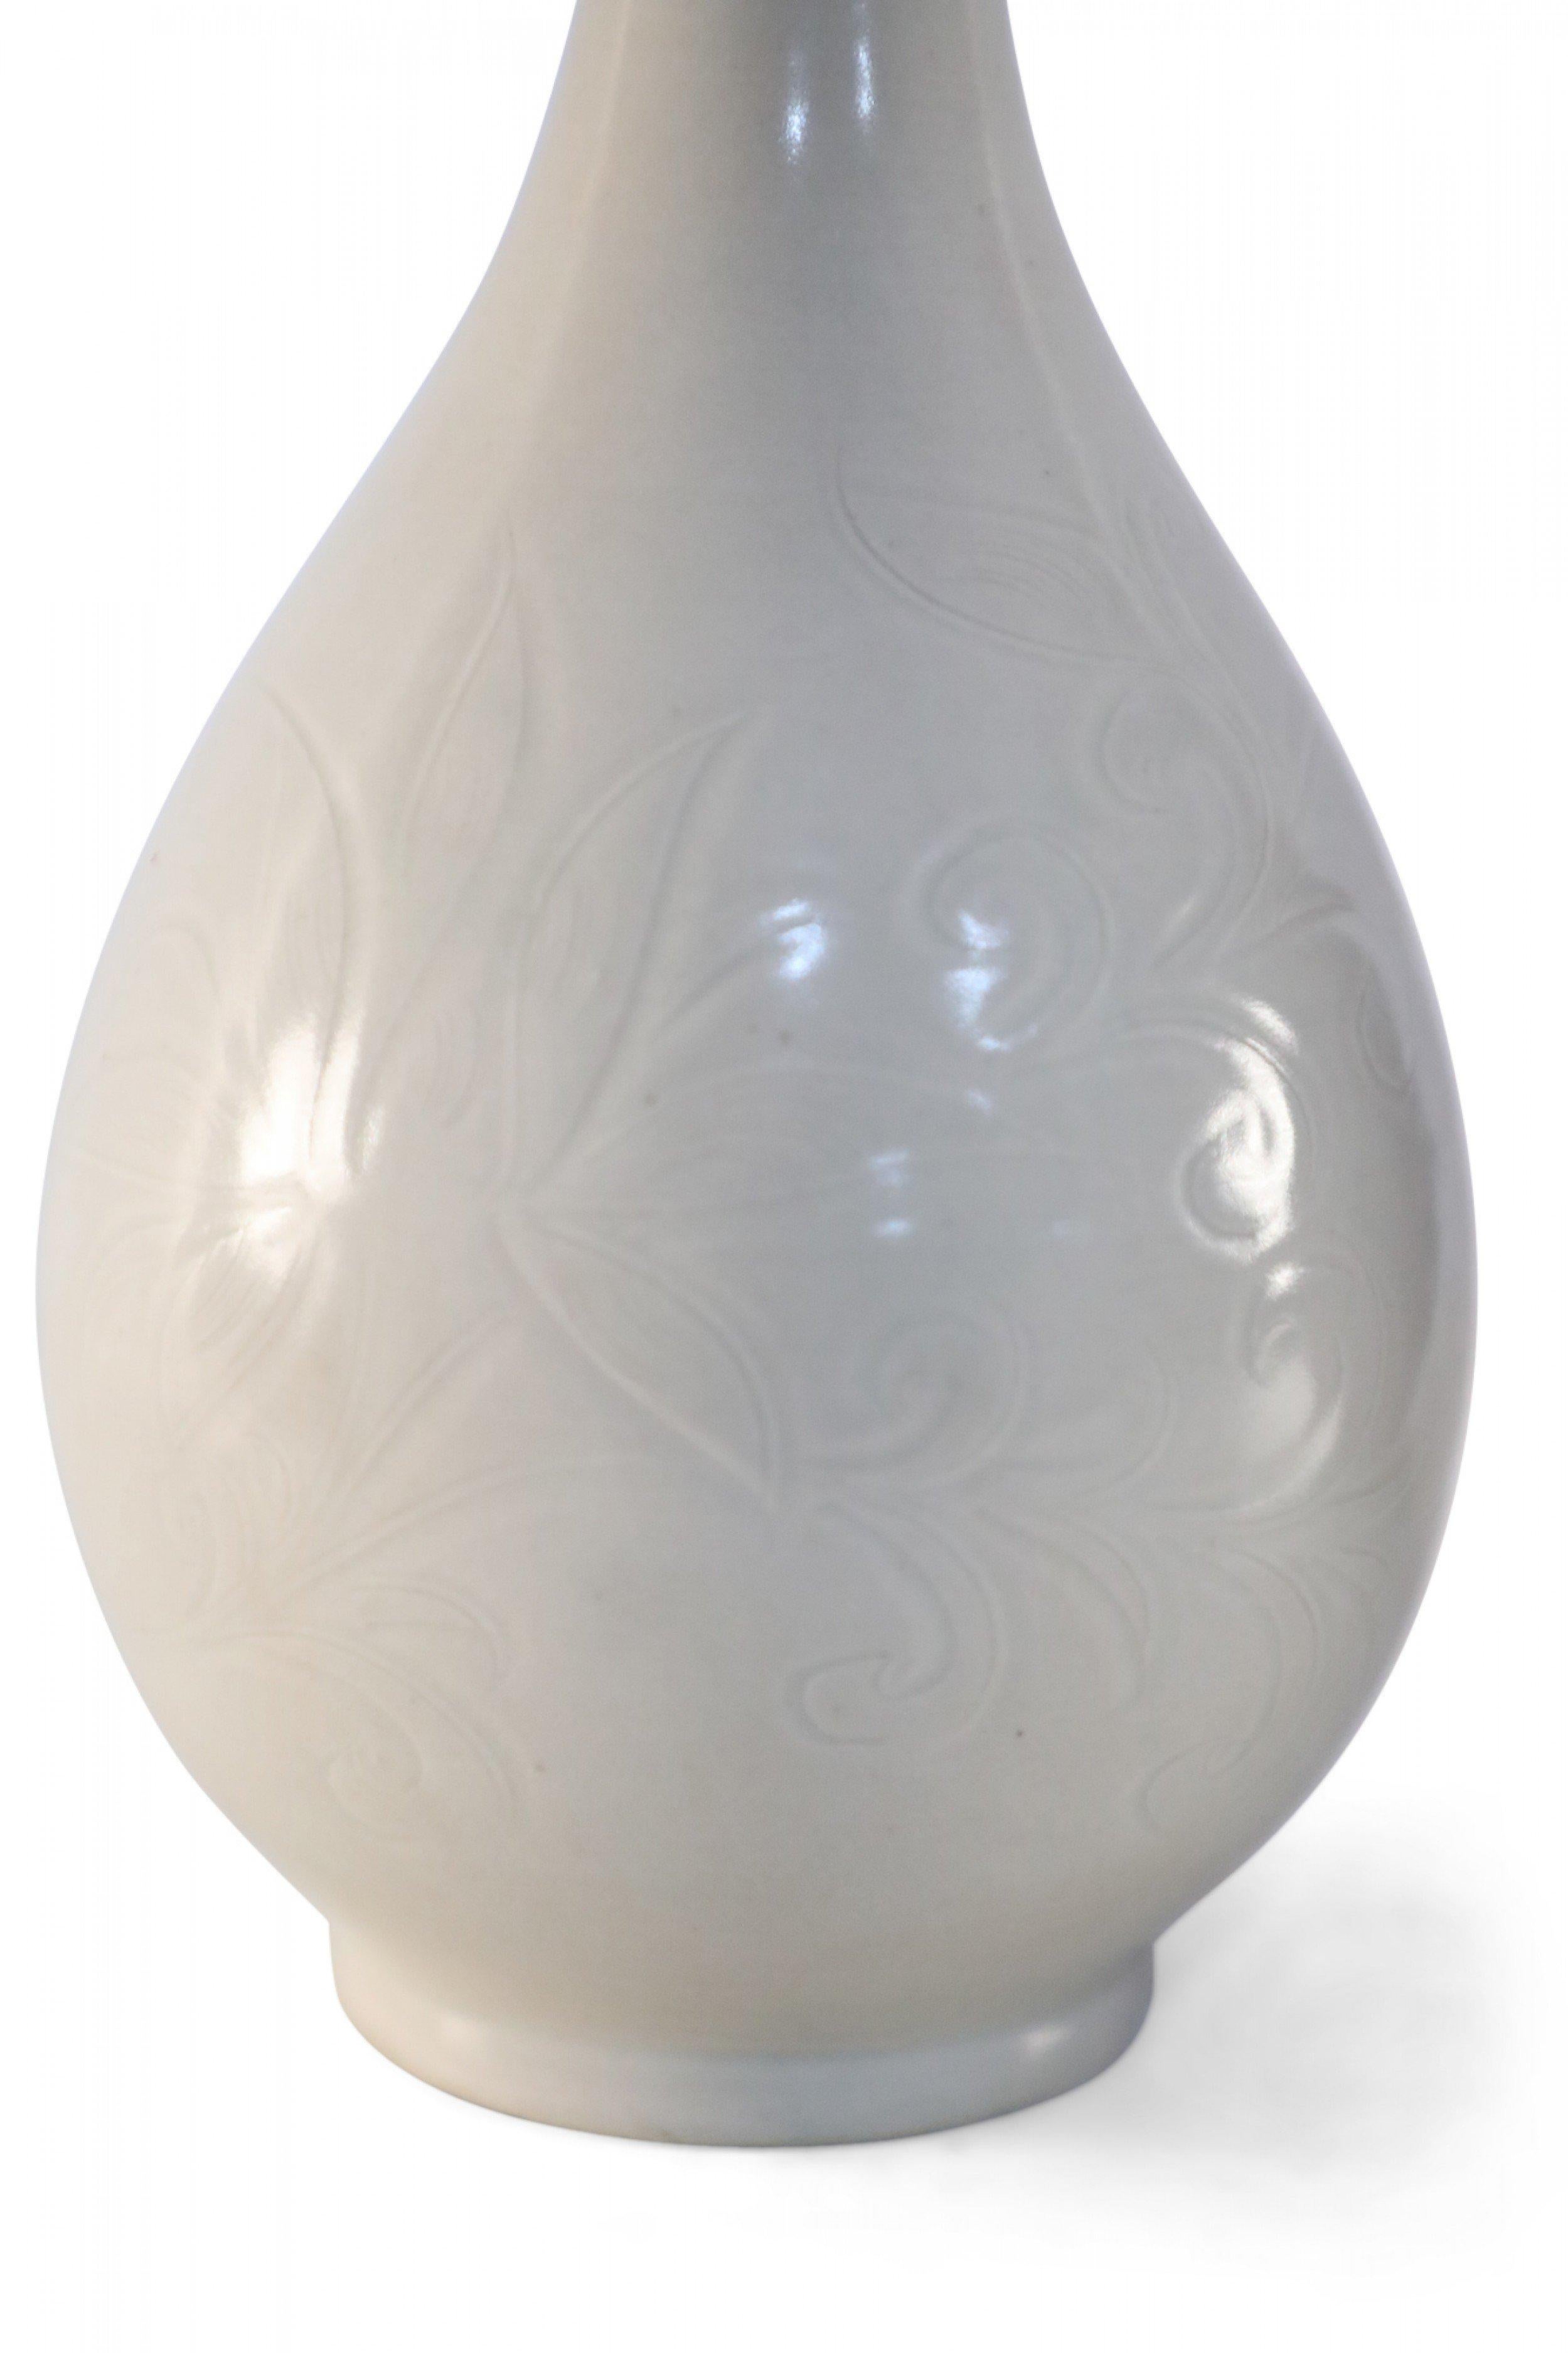 Chinese Off-White and Tonal Patterned Porcelain Vase For Sale 2